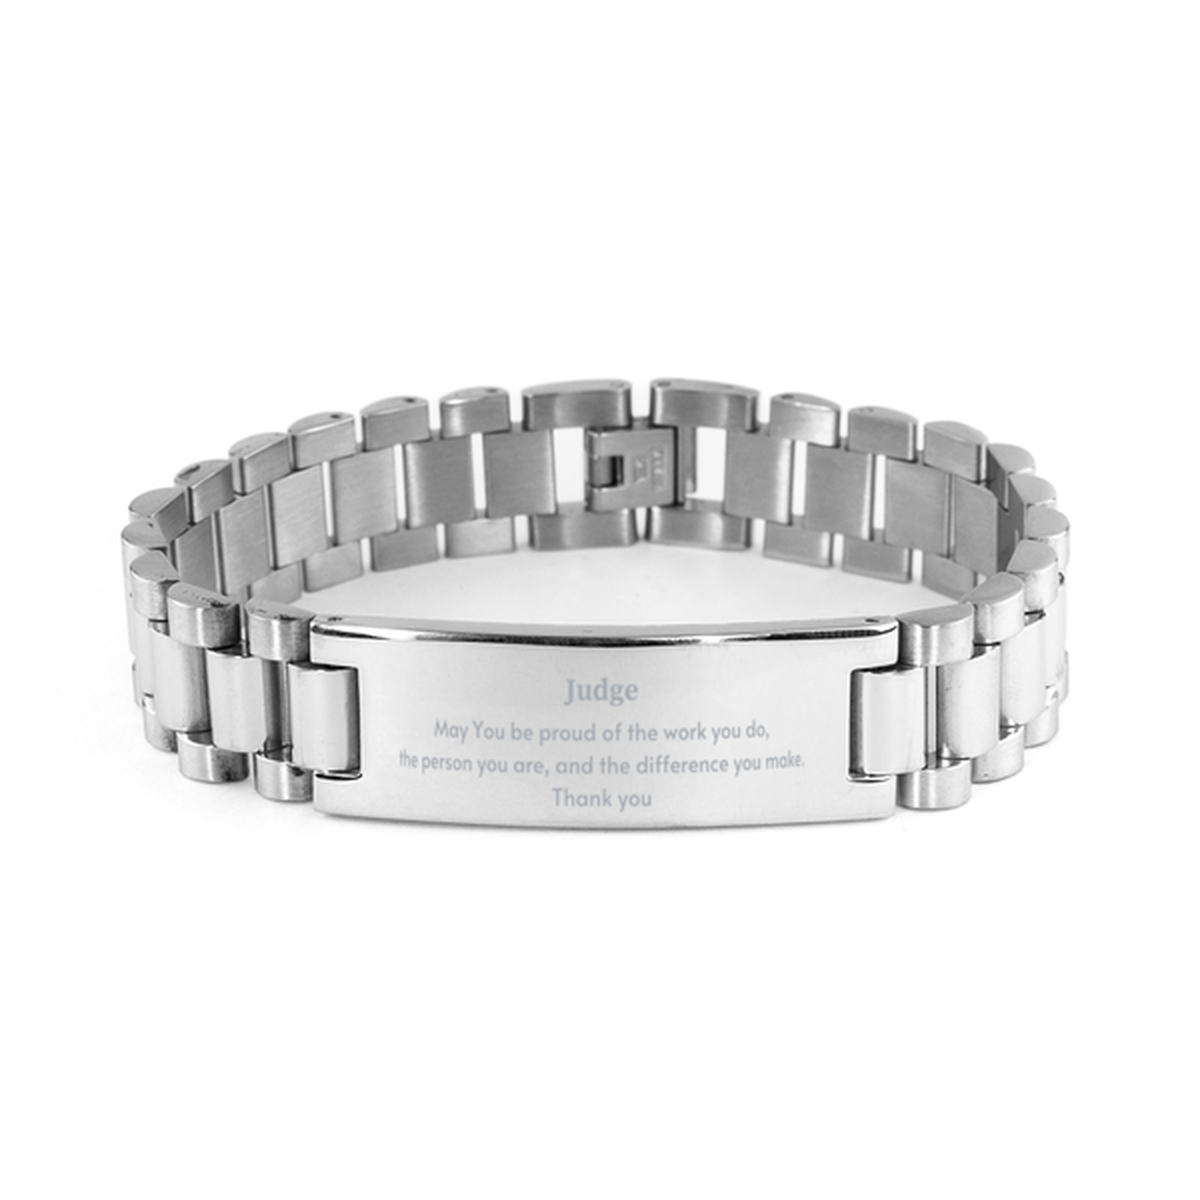 Heartwarming Ladder Stainless Steel Bracelet Retirement Coworkers Gifts for Judge, Judge May You be proud of the work you do, the person you are Gifts for Boss Men Women Friends